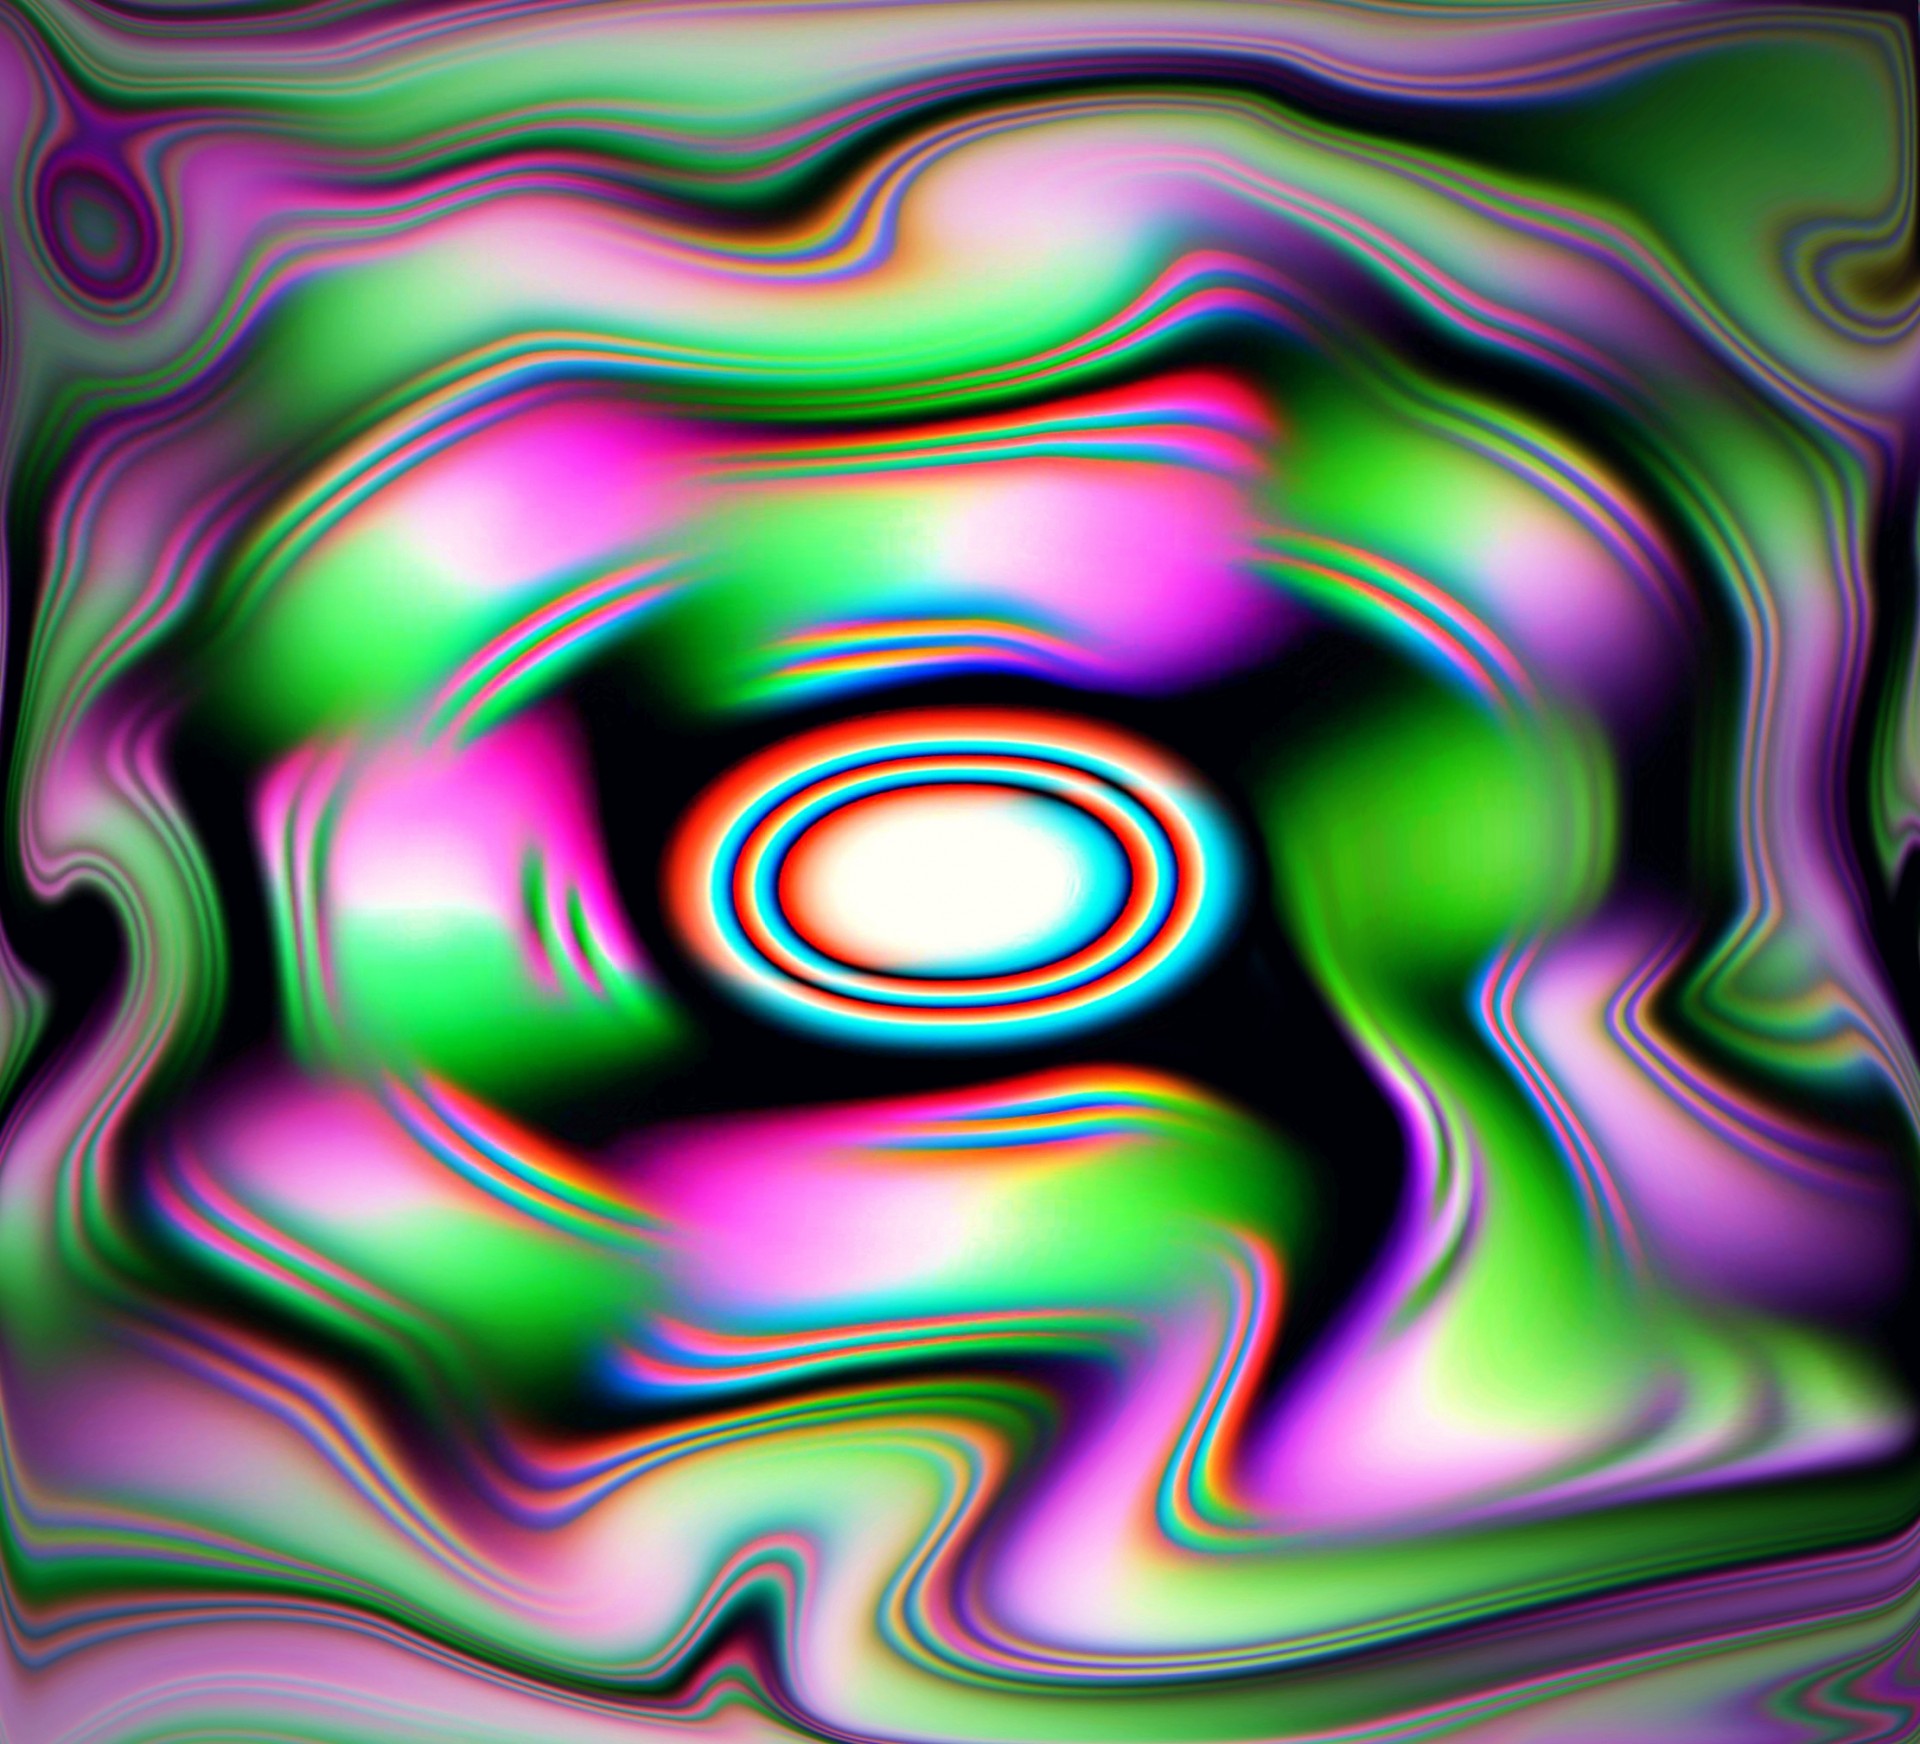 abstractly extraterrestrial ufo inside lavender sauce free photo